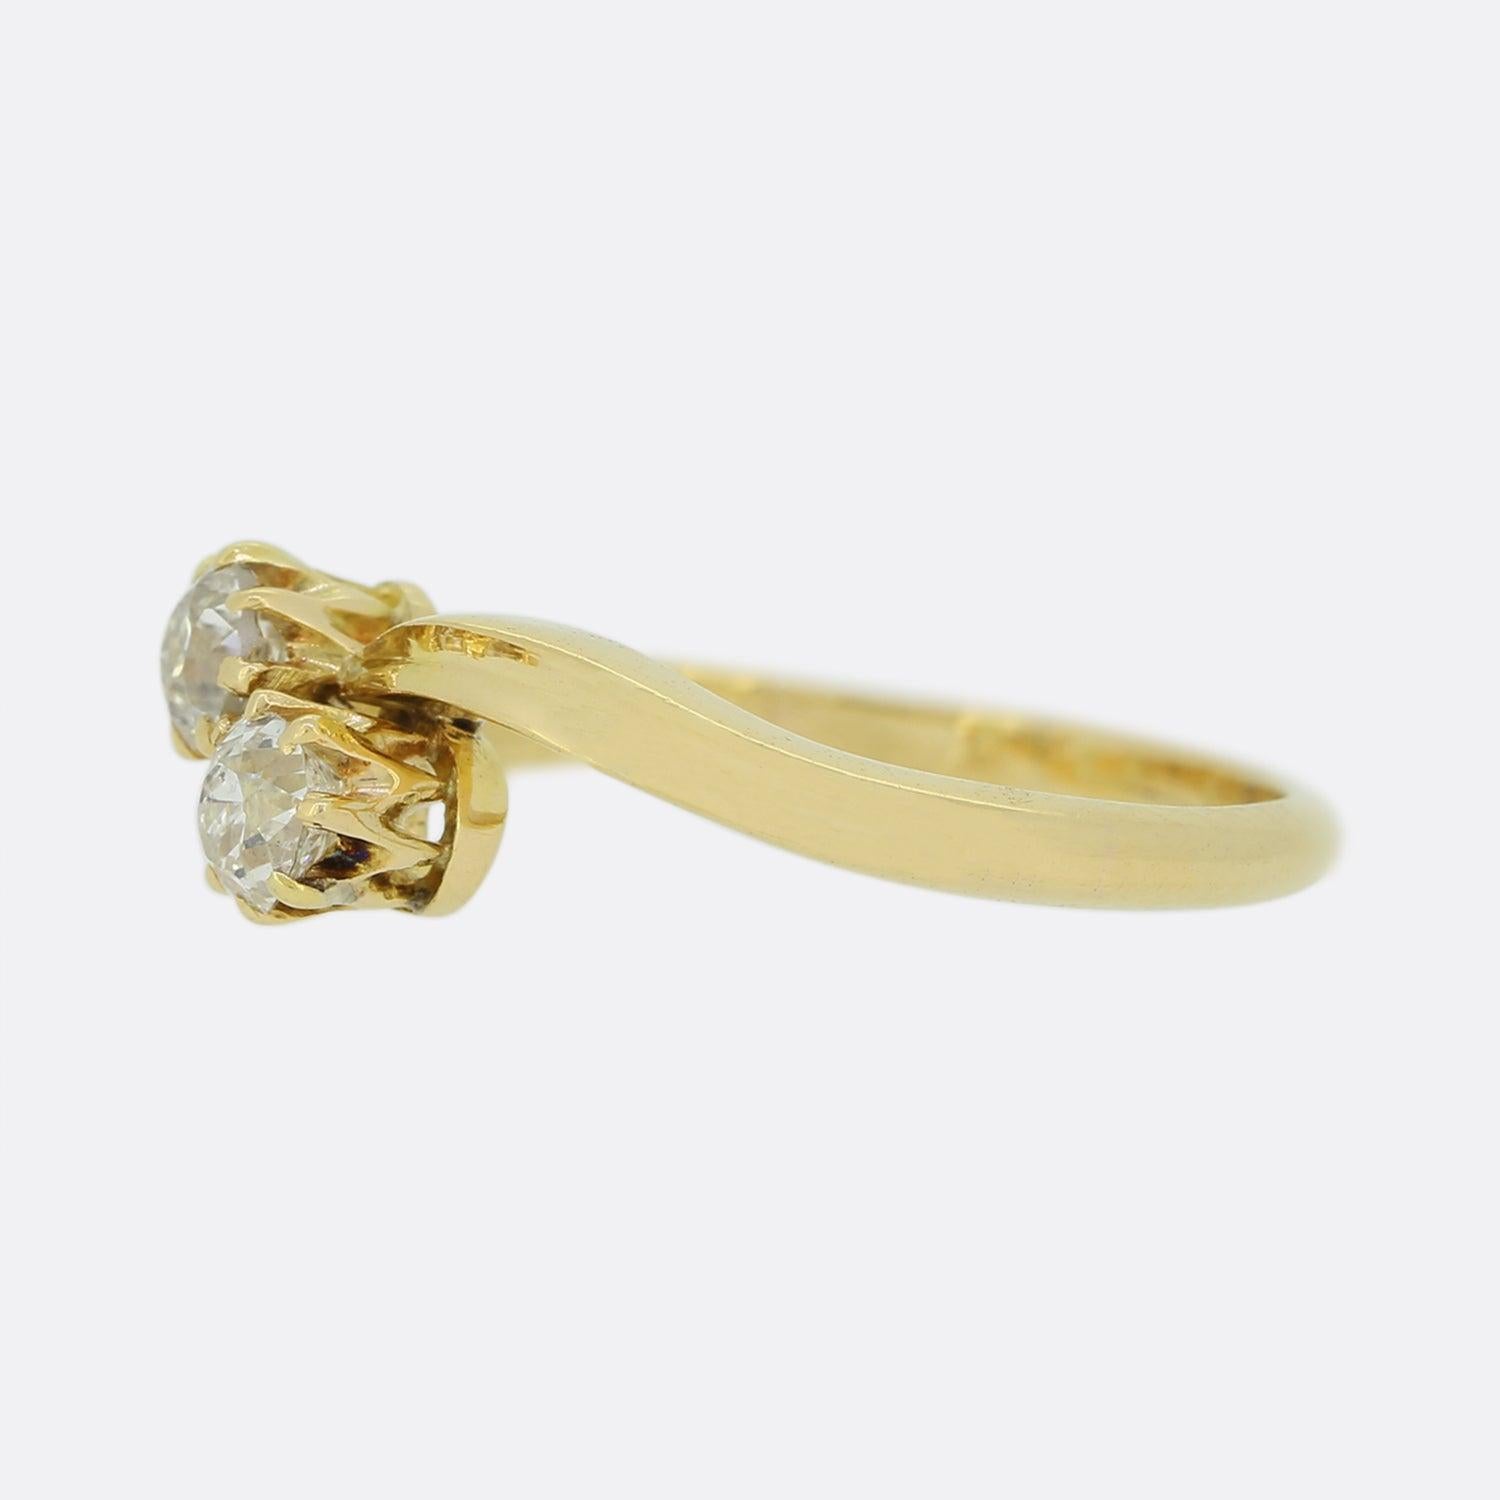 Here we have a classic two stone diamond ring. This vintage piece has been crafted from 18ct yellow gold and presents two closely claw set round old cut diamonds atop a thin swirling band. 

Condition: Used (Very Good)
Weight: 2.5 grams
Ring Size: K